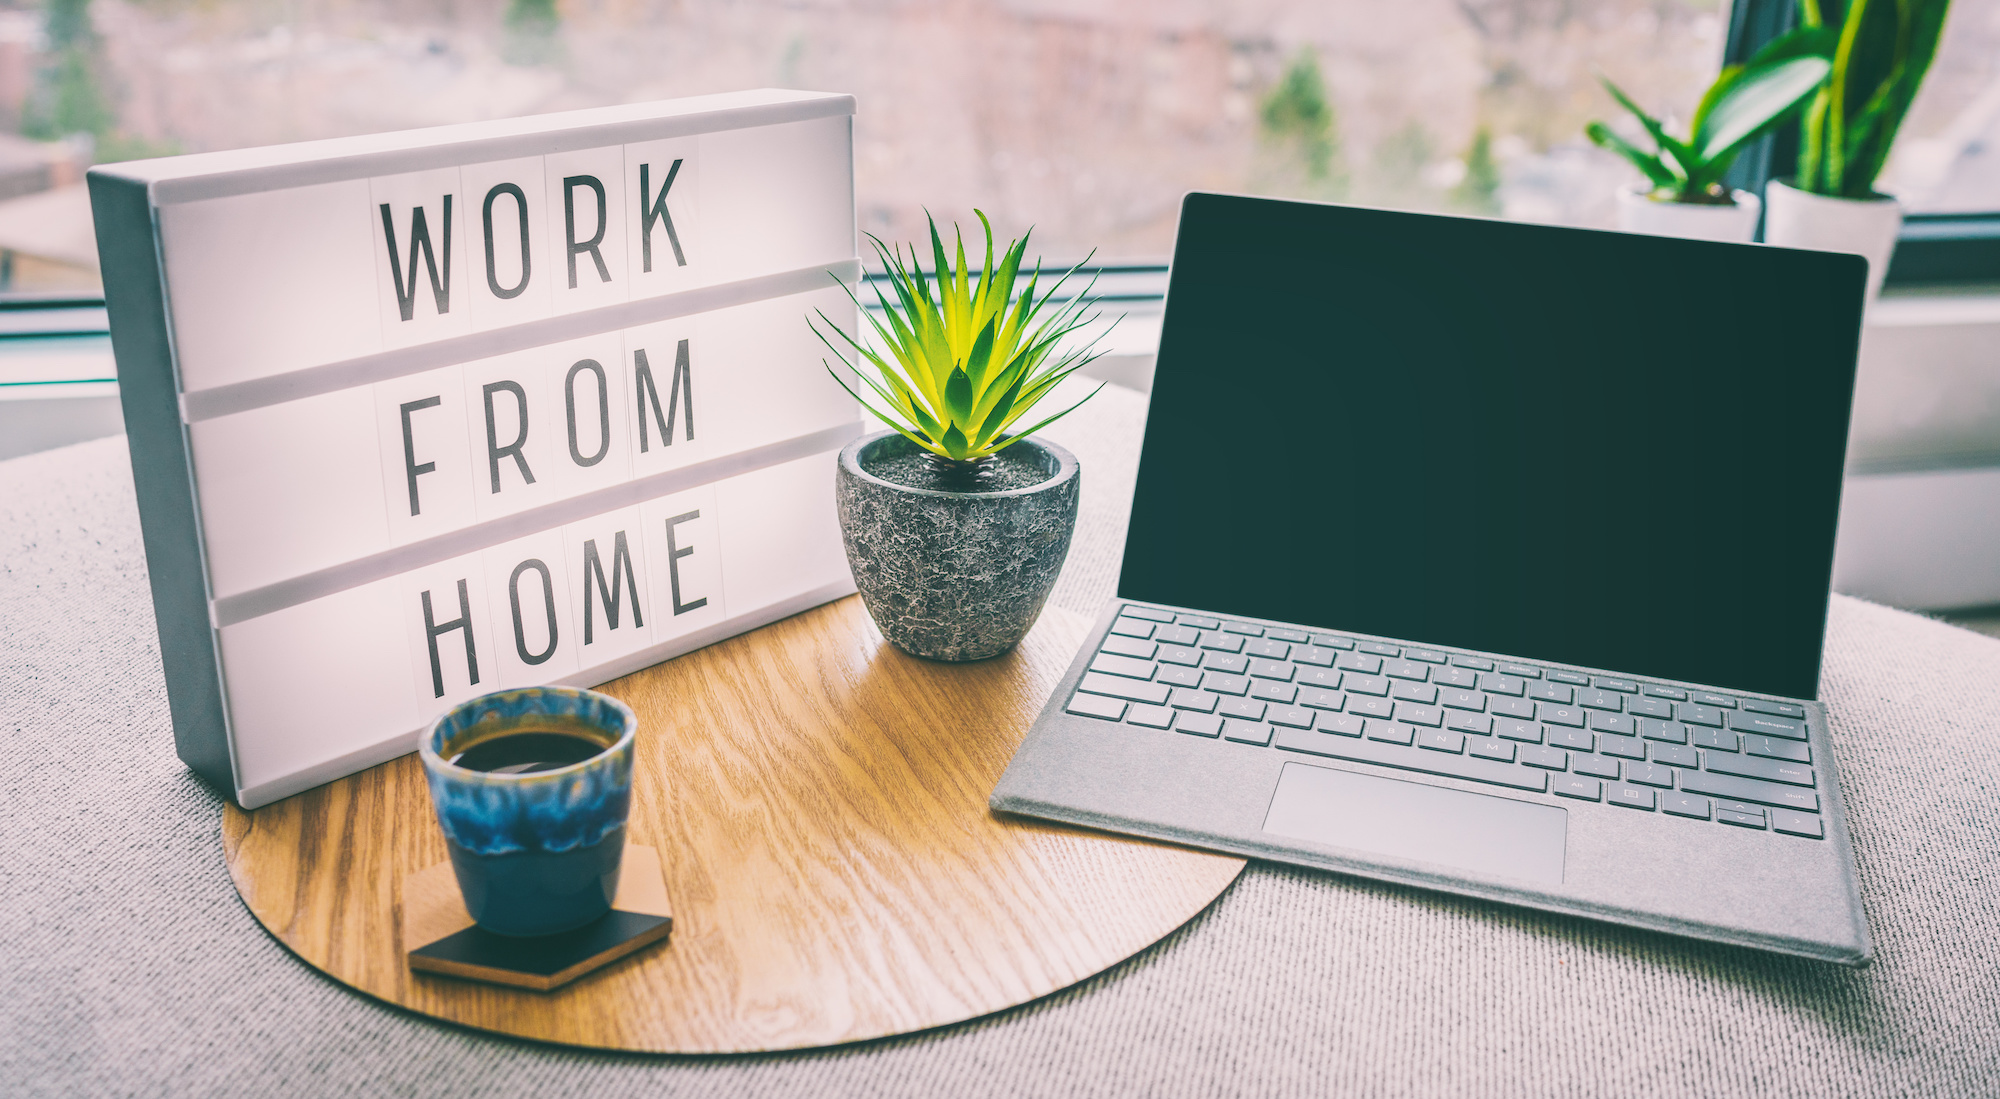 A sign that reads "work from home" next to a laptop on a desk.